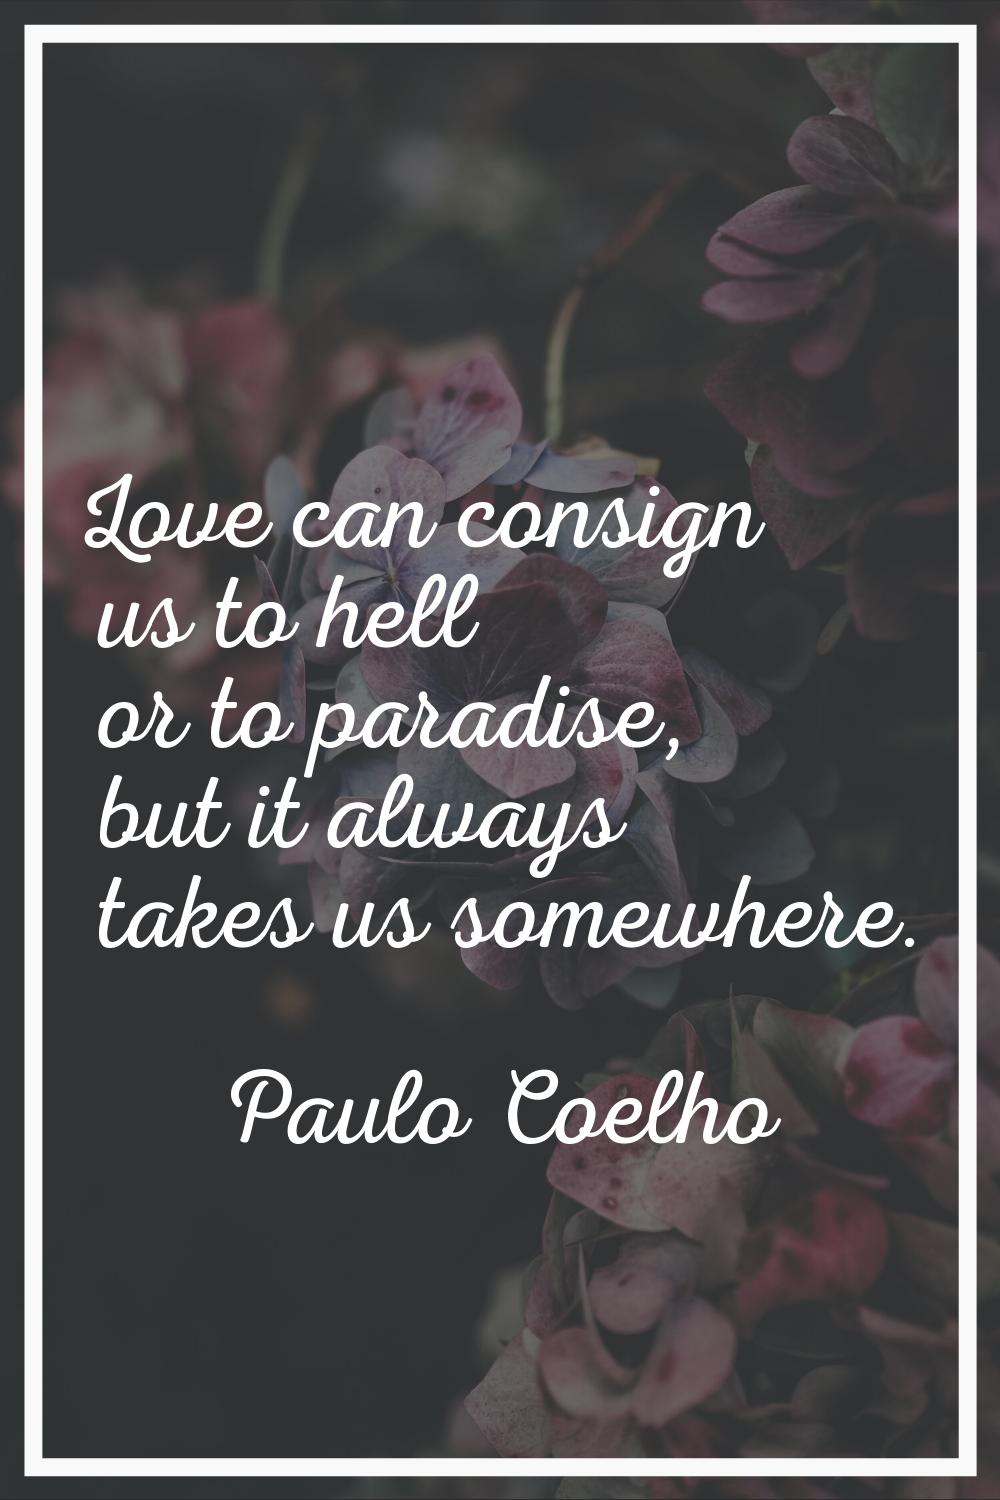 Love can consign us to hell or to paradise, but it always takes us somewhere.